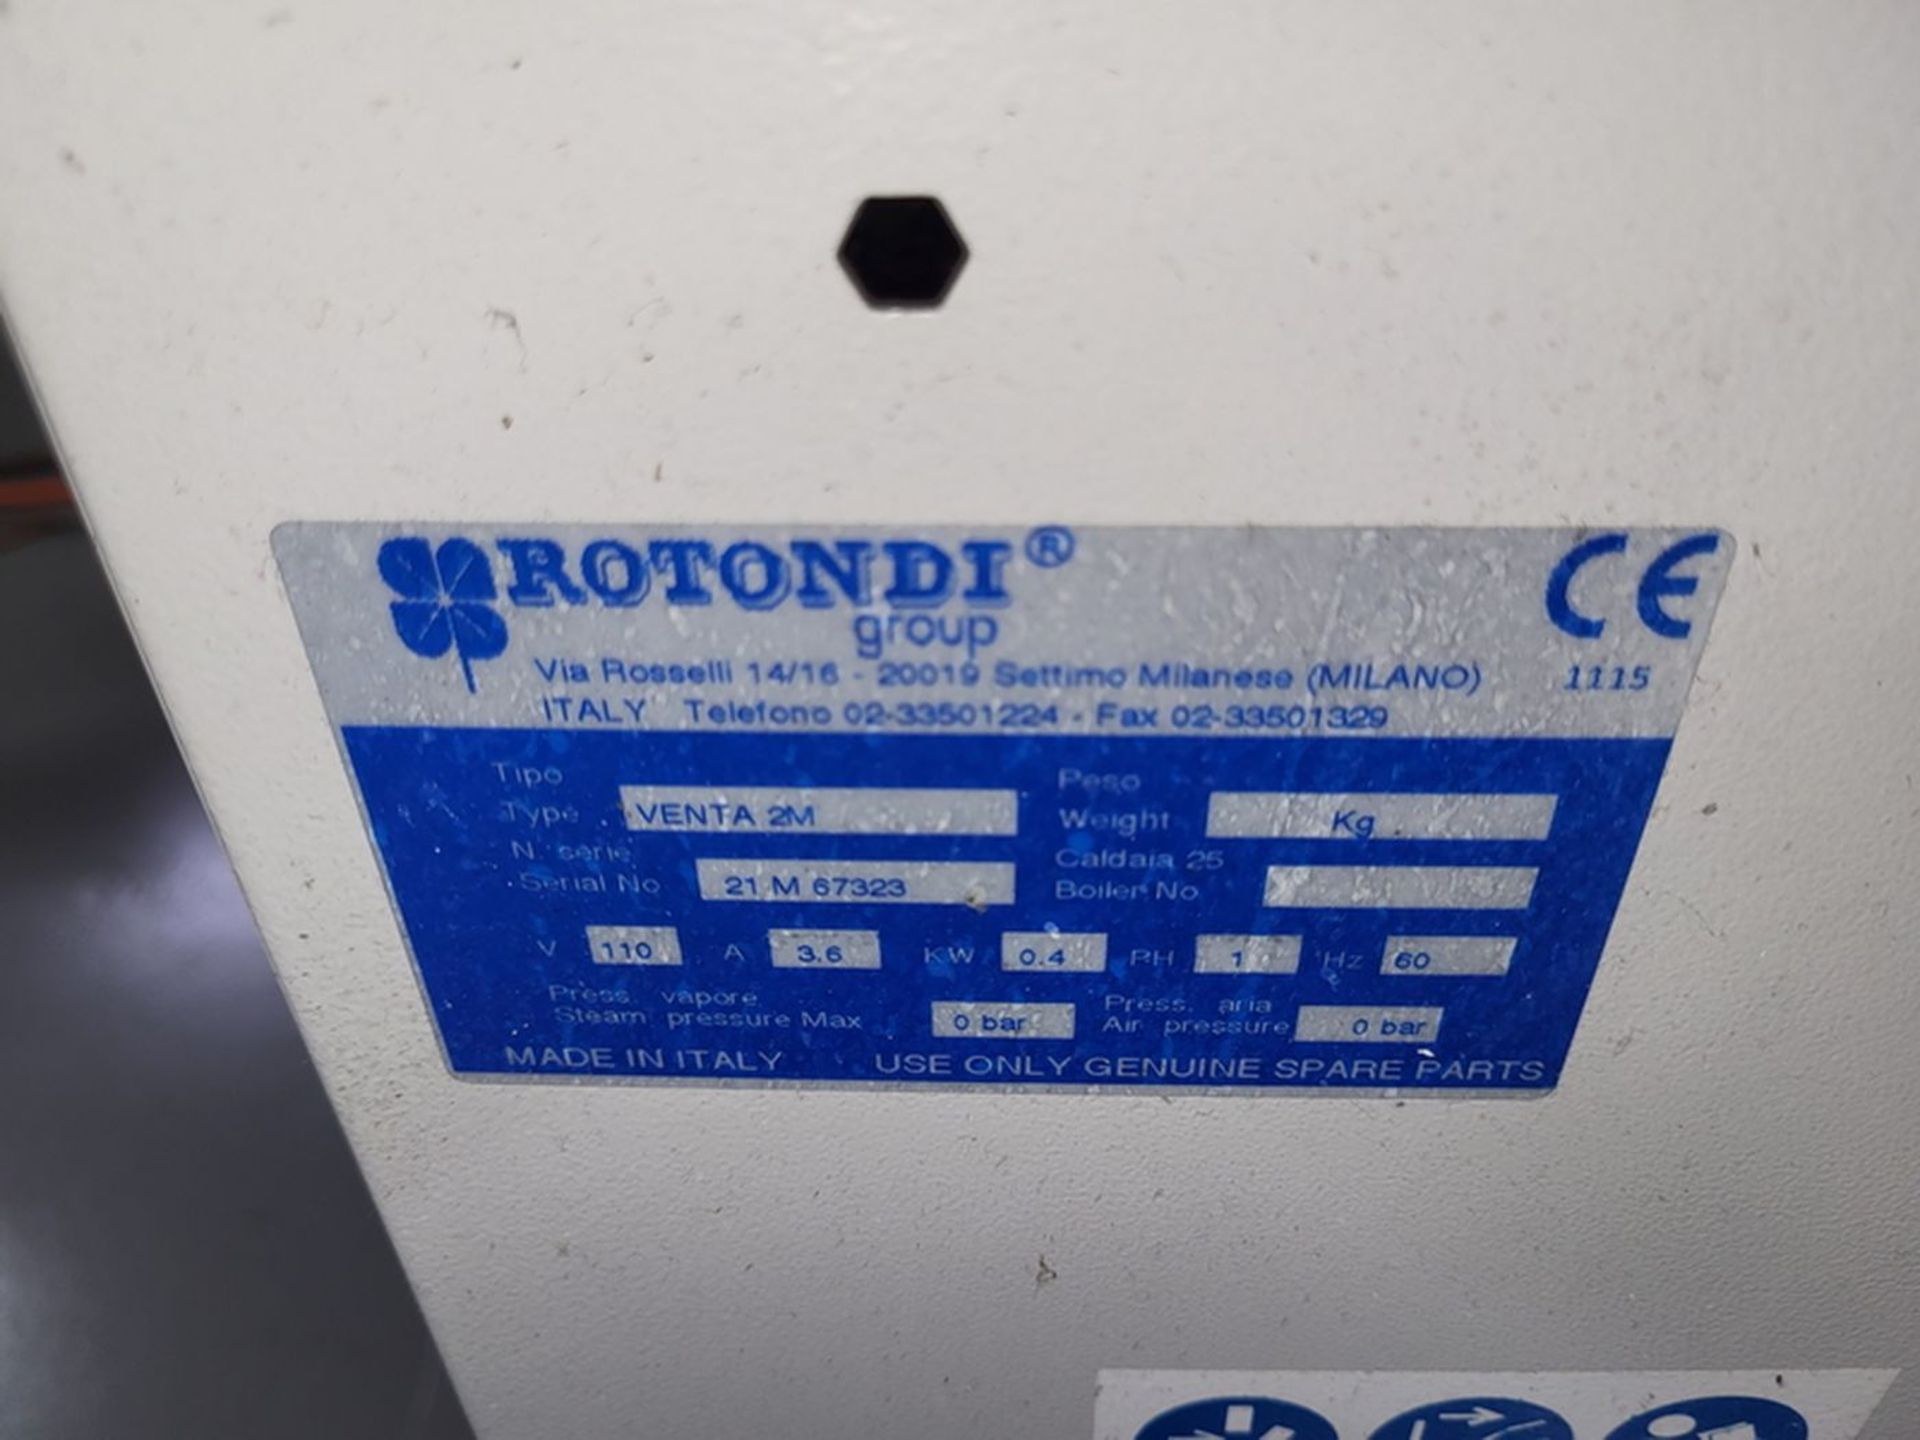 Rotondi Model Venta-2M Spot Cleaning Station, S/N: 21 M 67323; with ProBlast Textile Spot Cleaning - Image 3 of 3